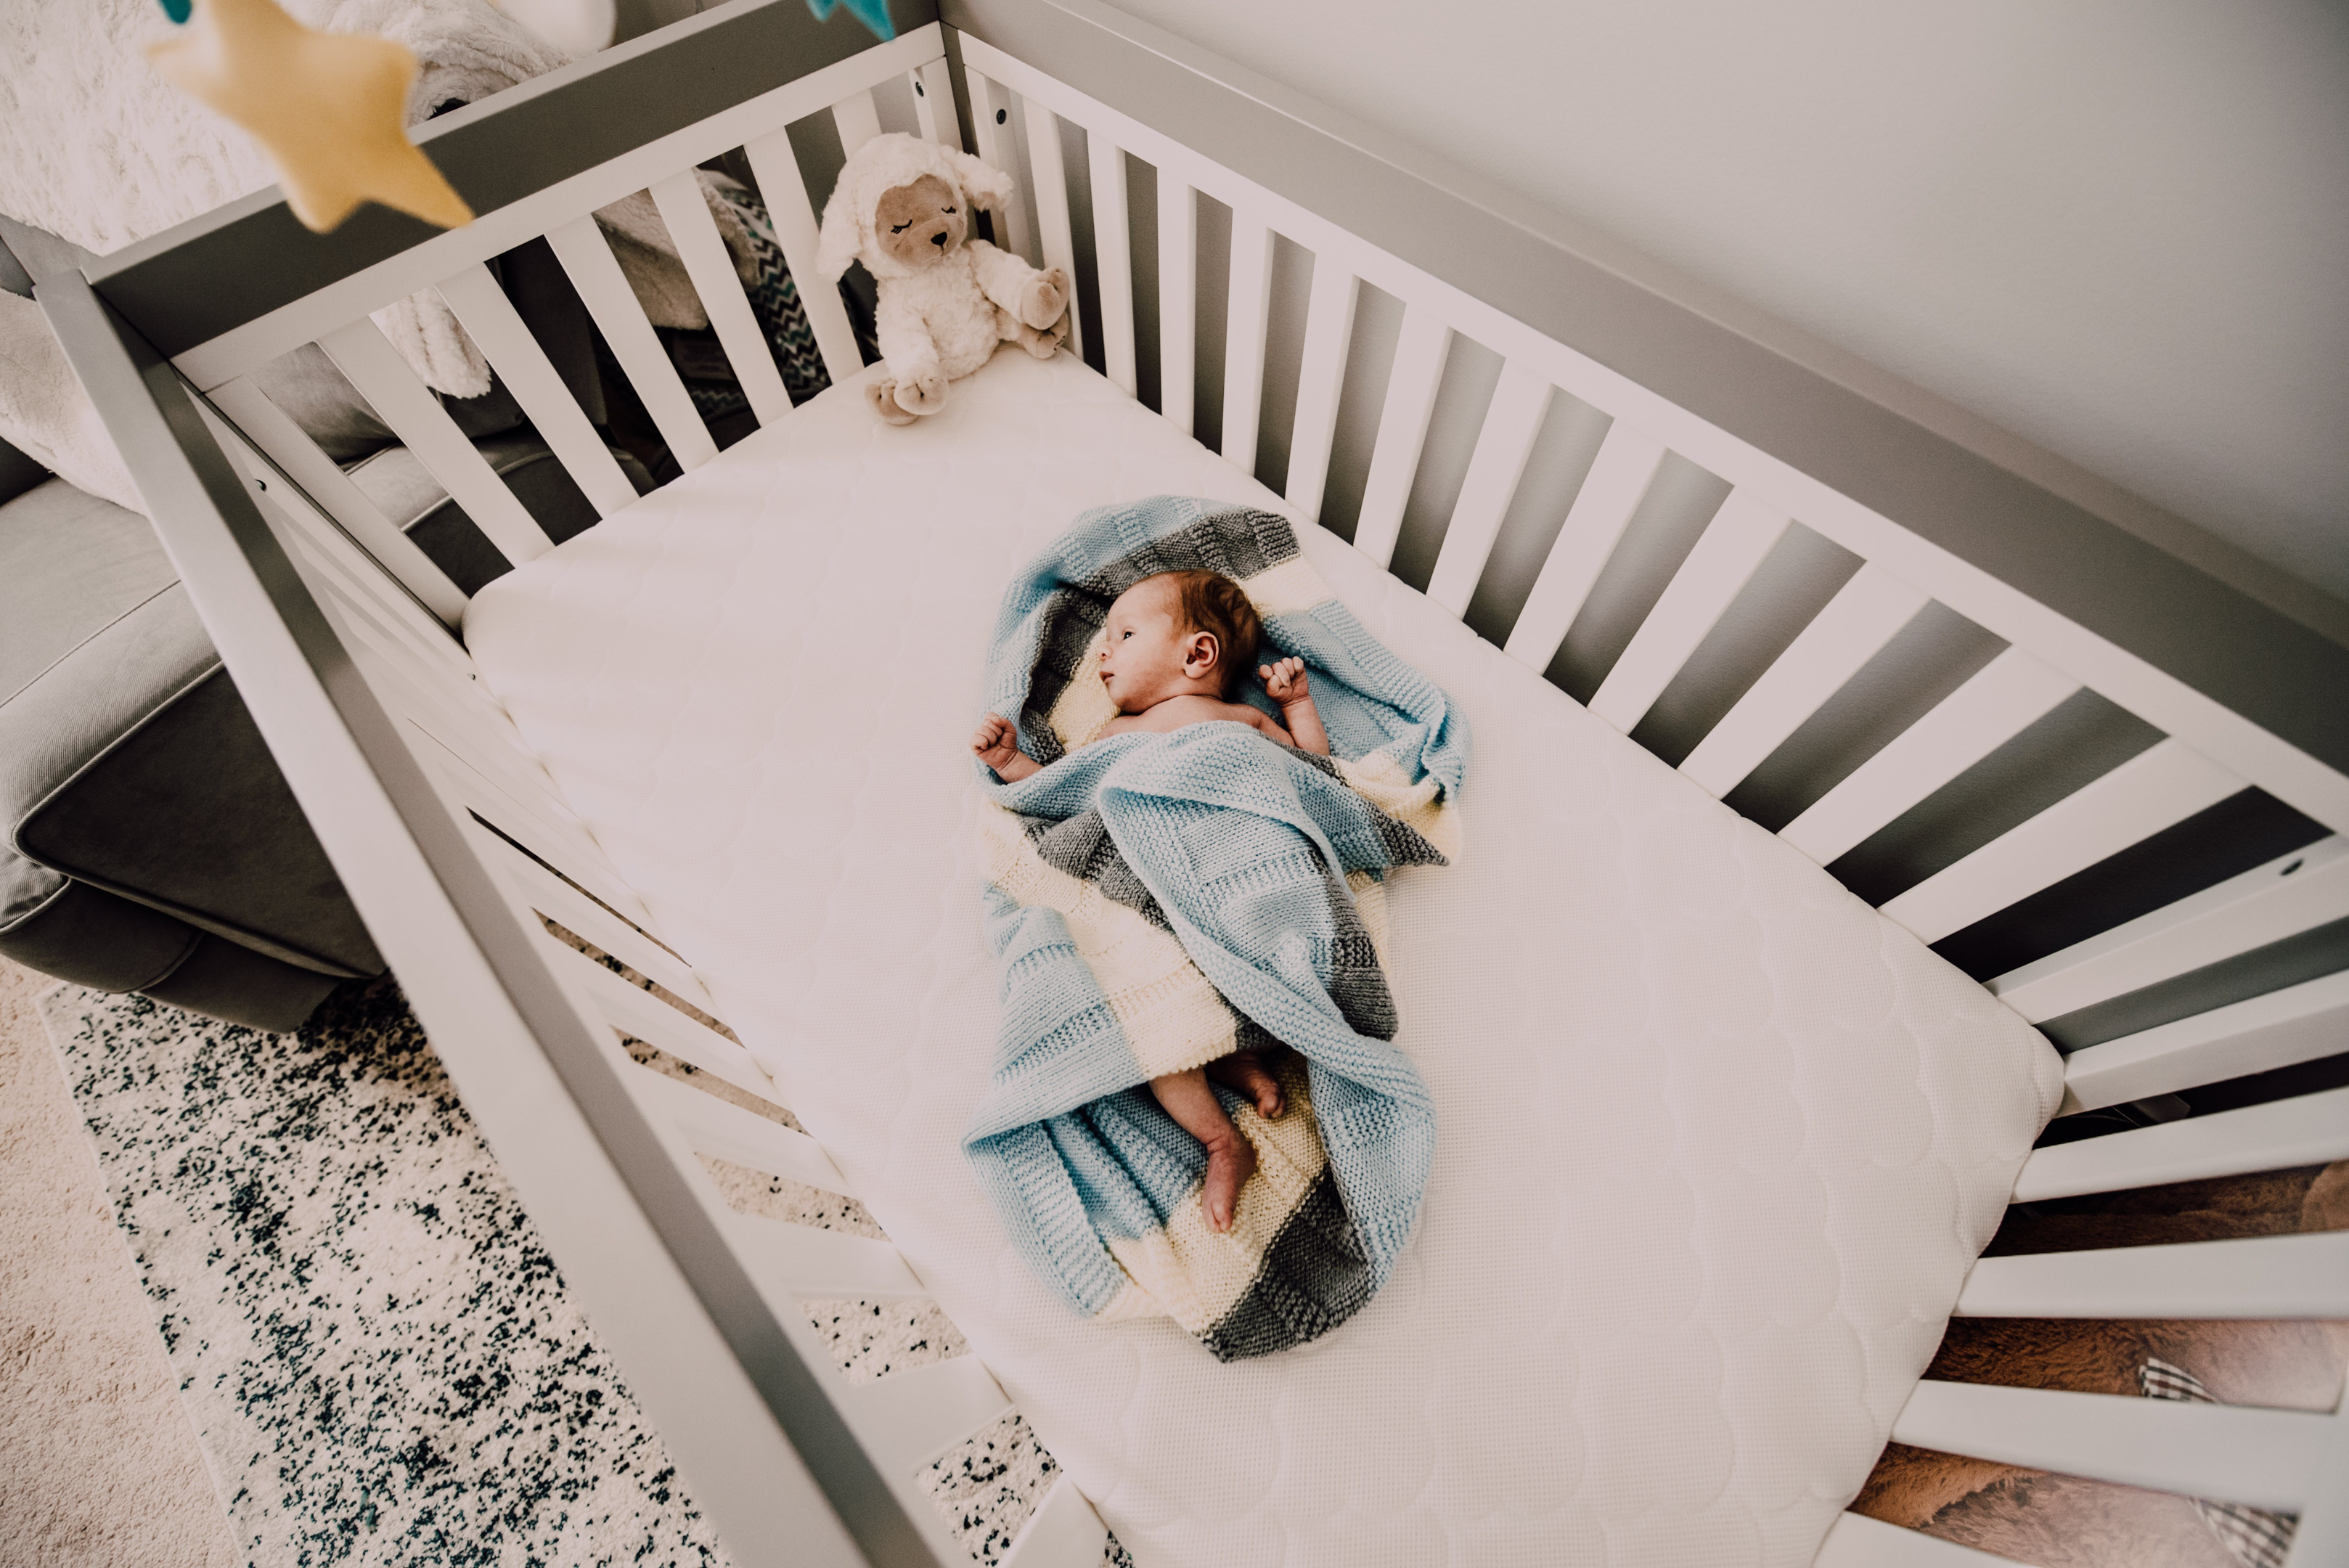 7 month old baby sleeping peacefully in crib